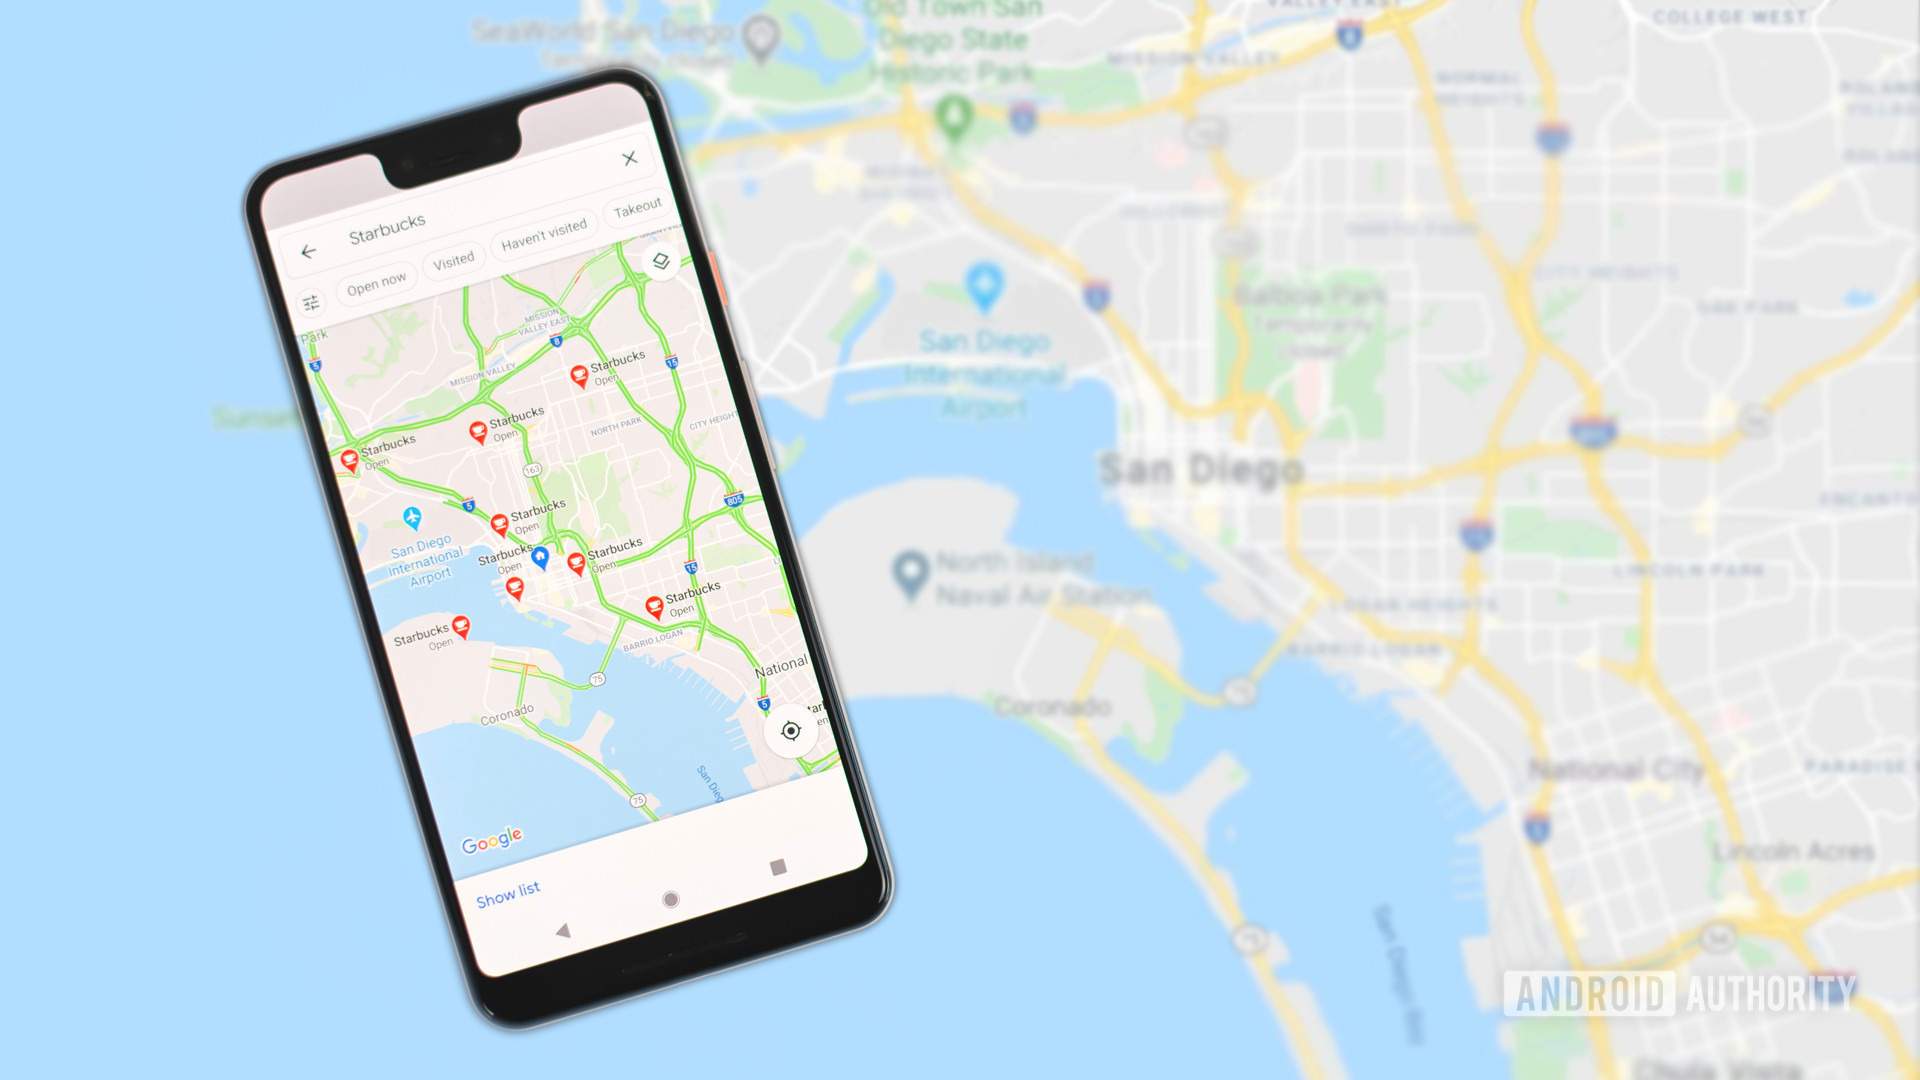 Google tries adding traffic lights to Maps on Android